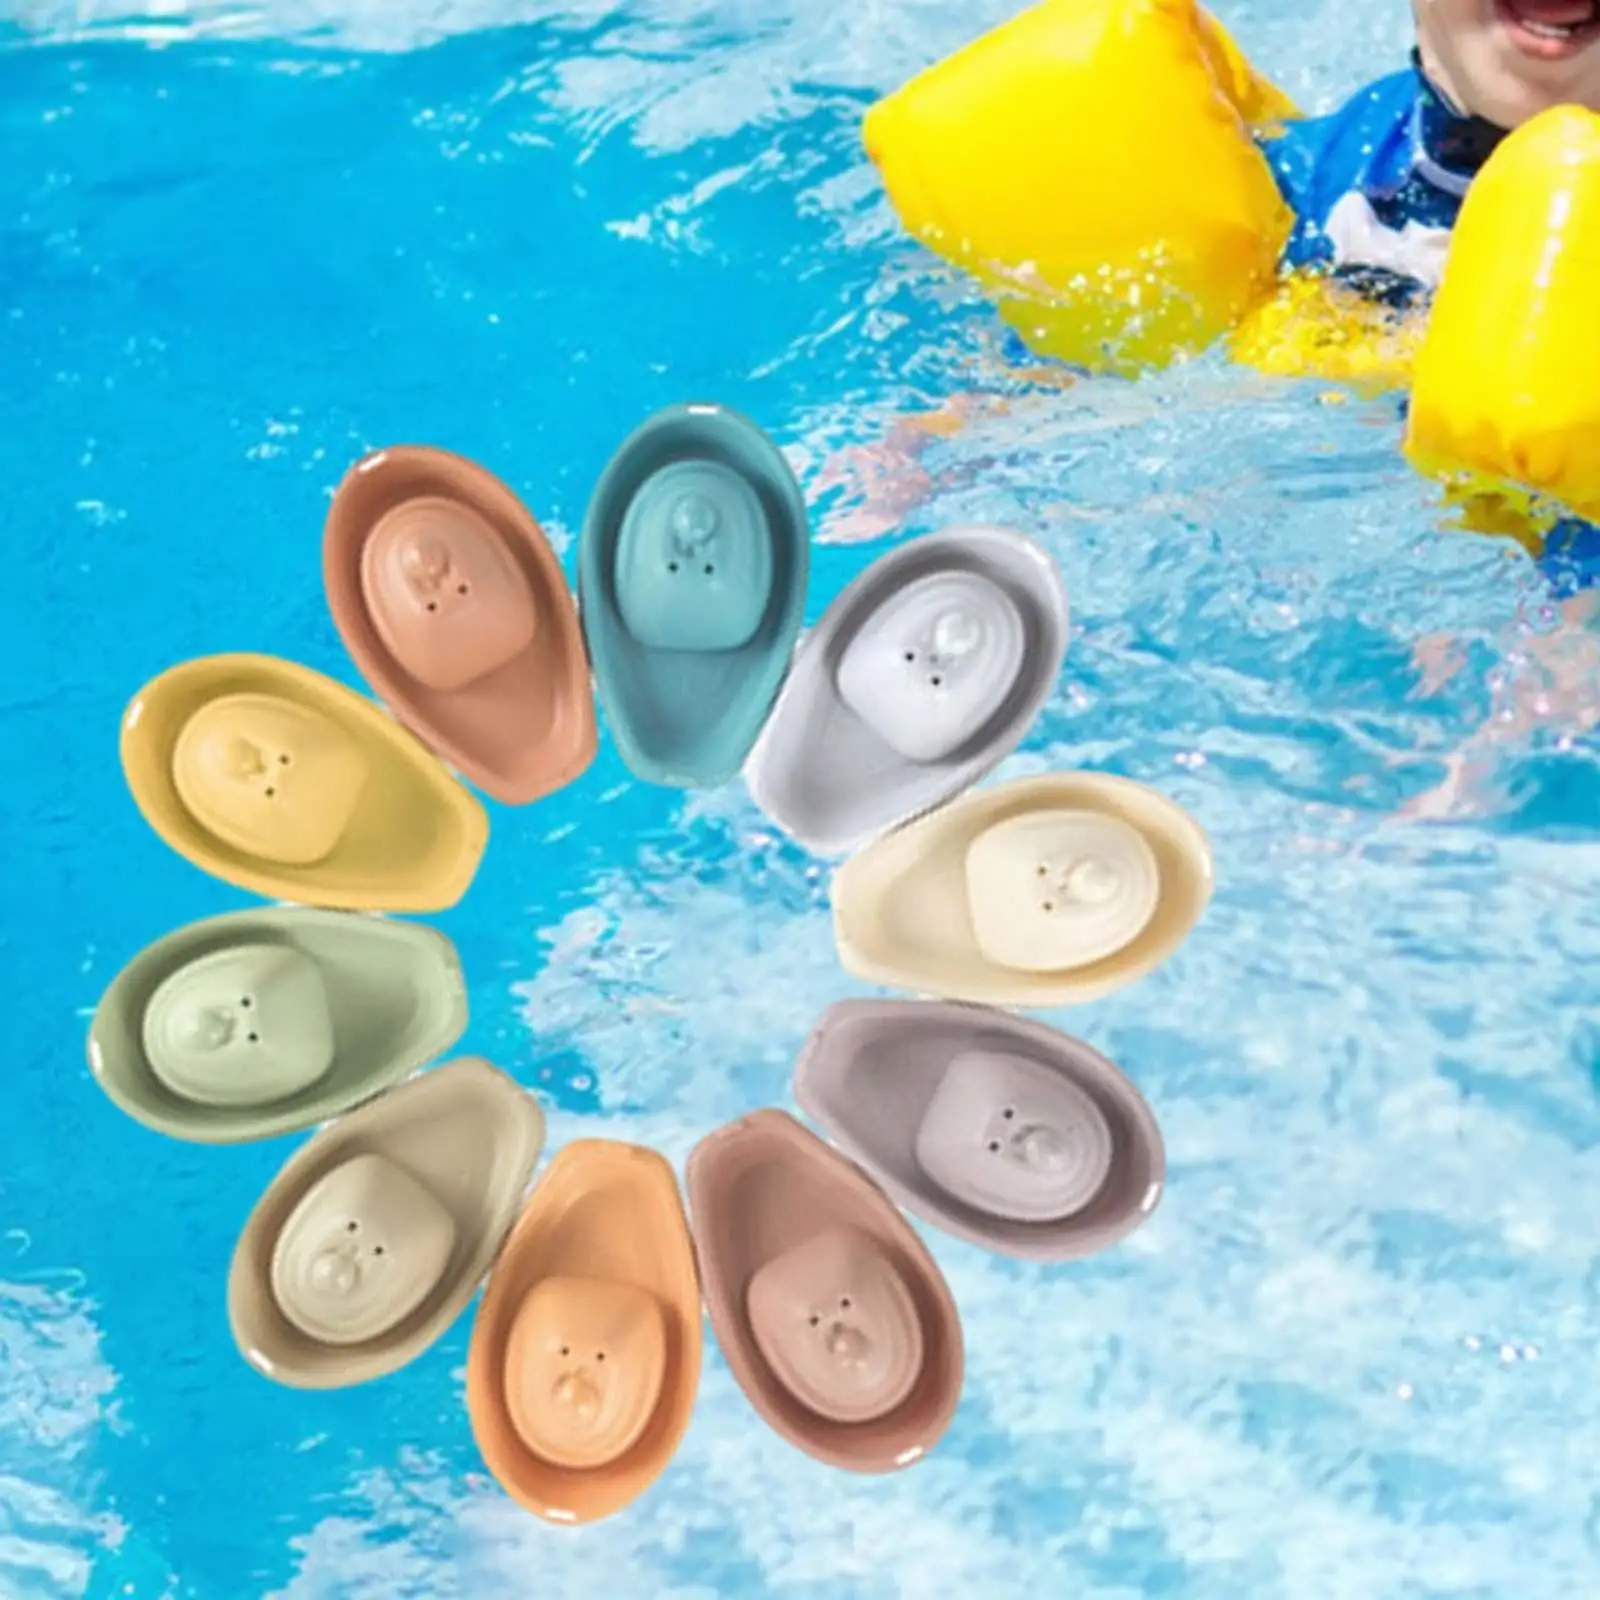 10Pcs Bath Toys Floating Boats Bath Pool Beach Toy Montessori Educational Water Stacking Boat for Babies Birthday Gift Party Toy